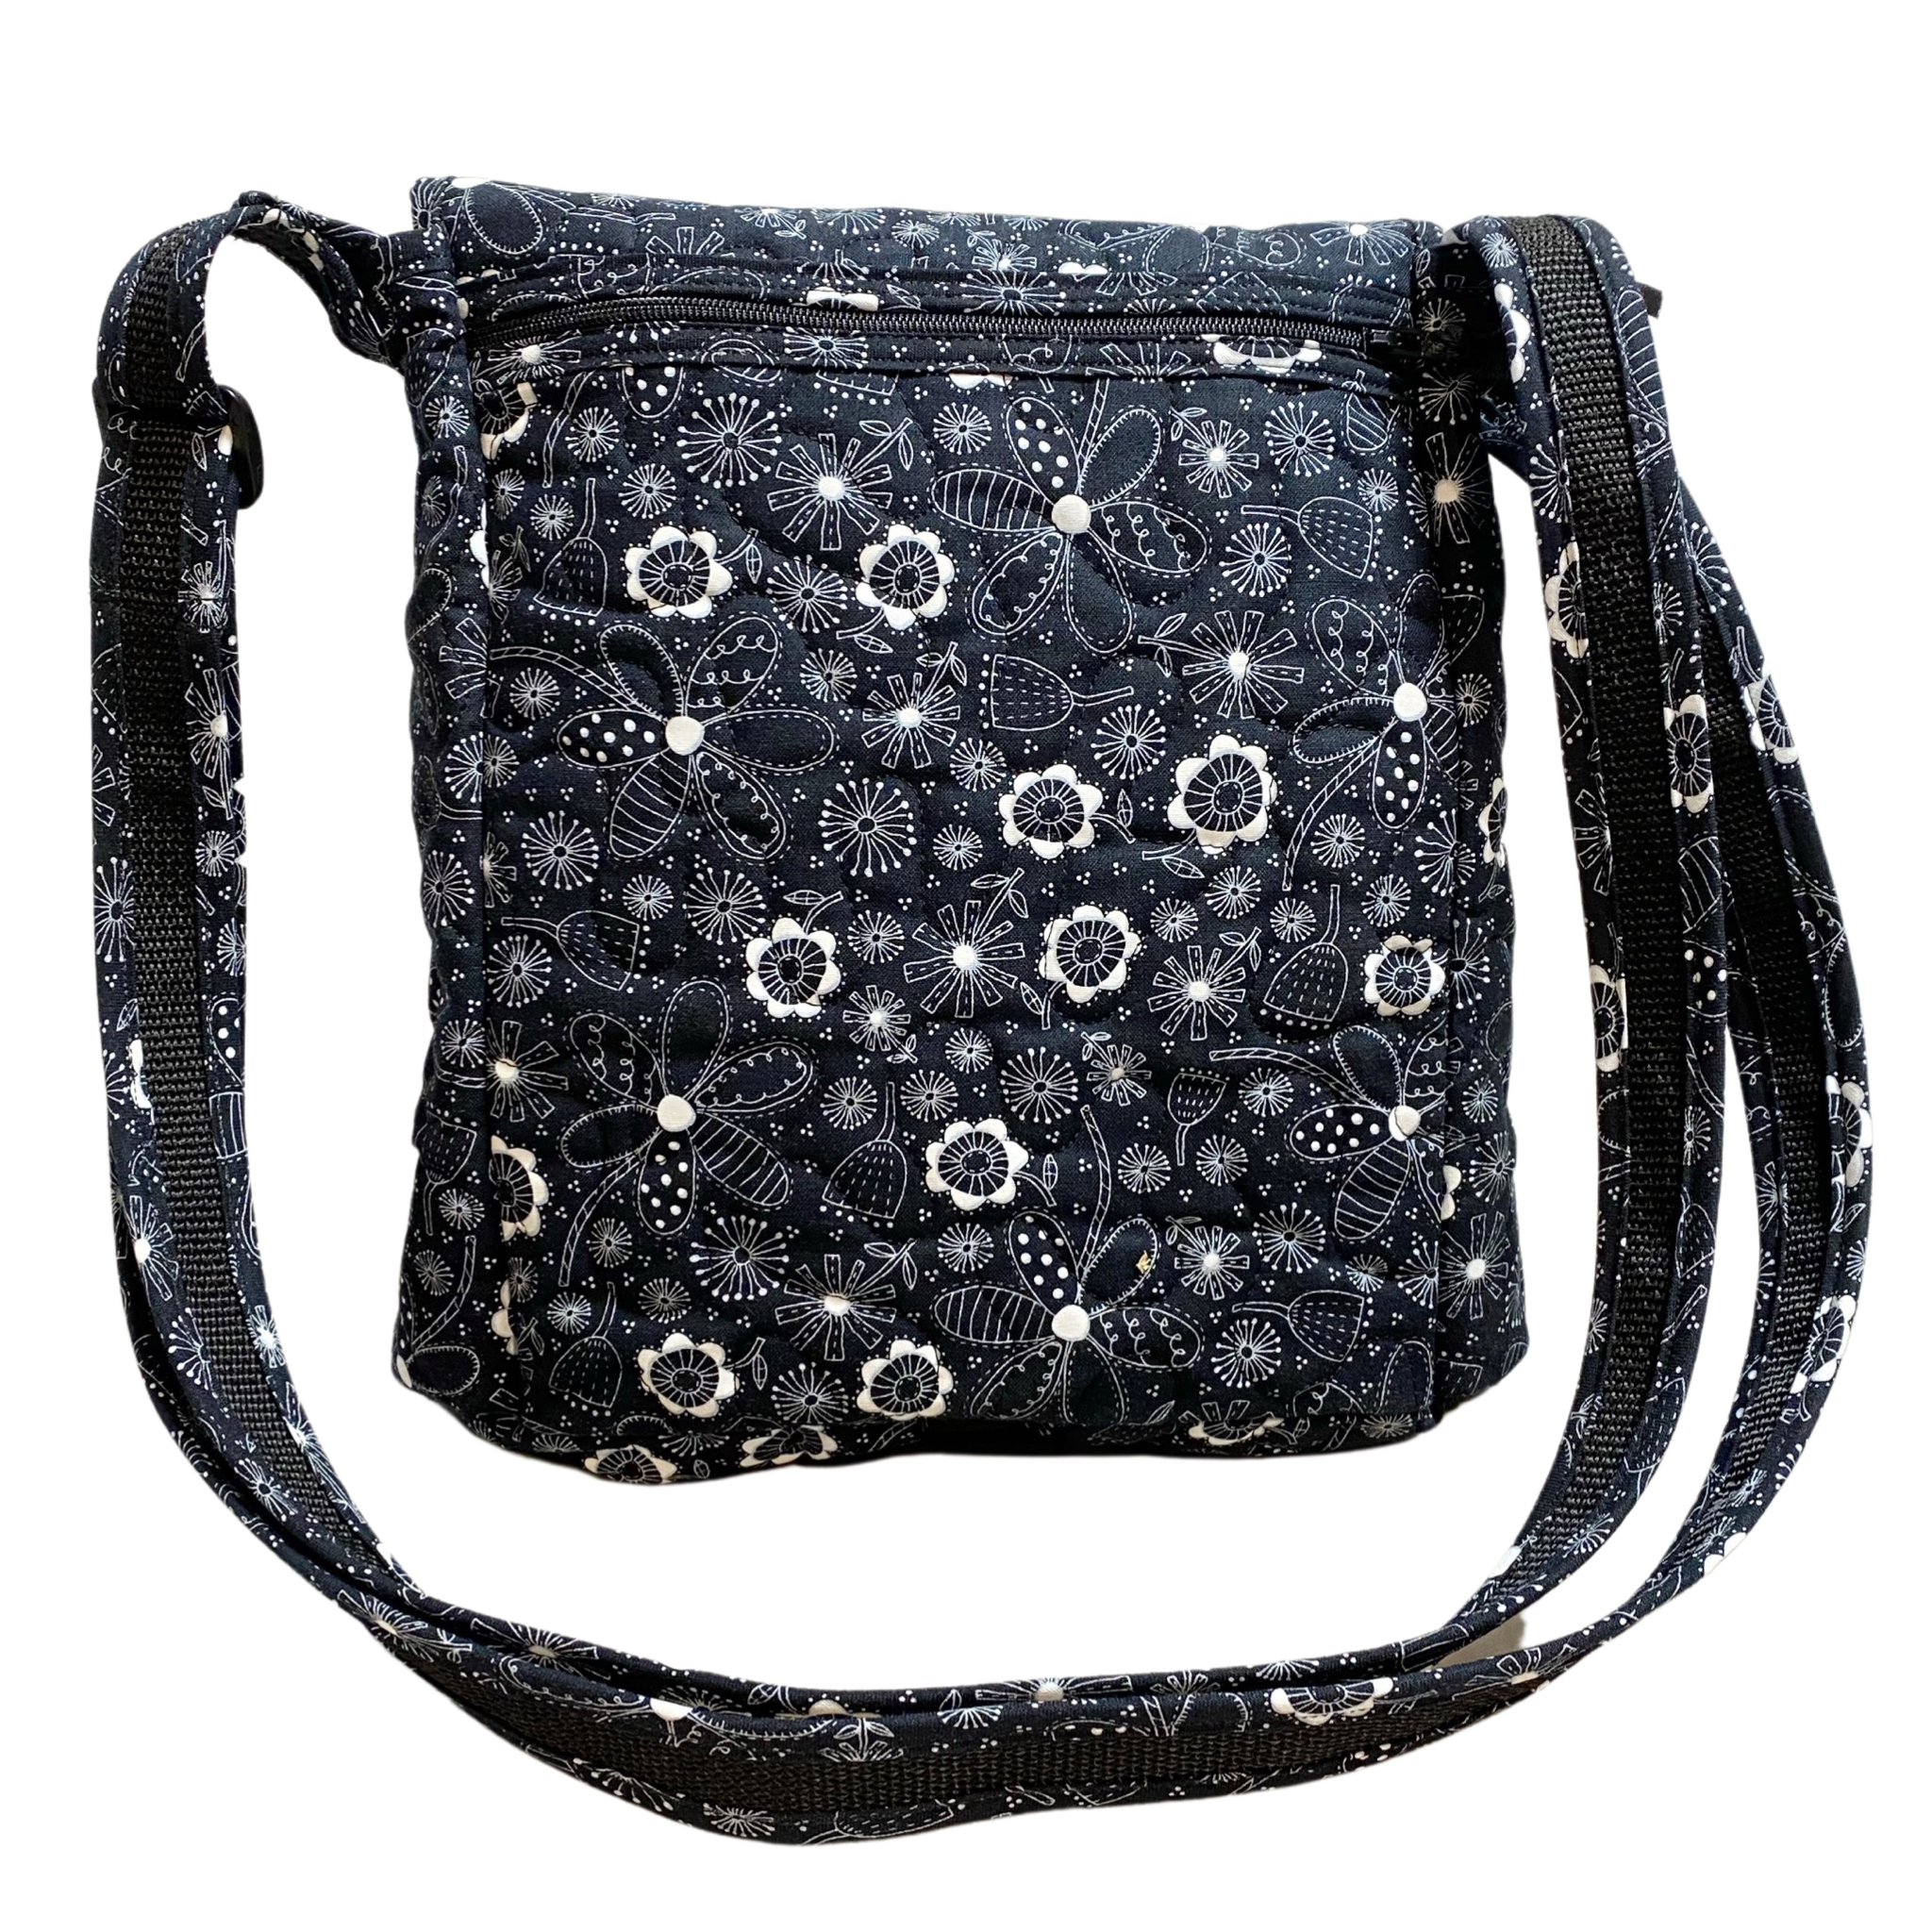 Buckle Bag - Stitches